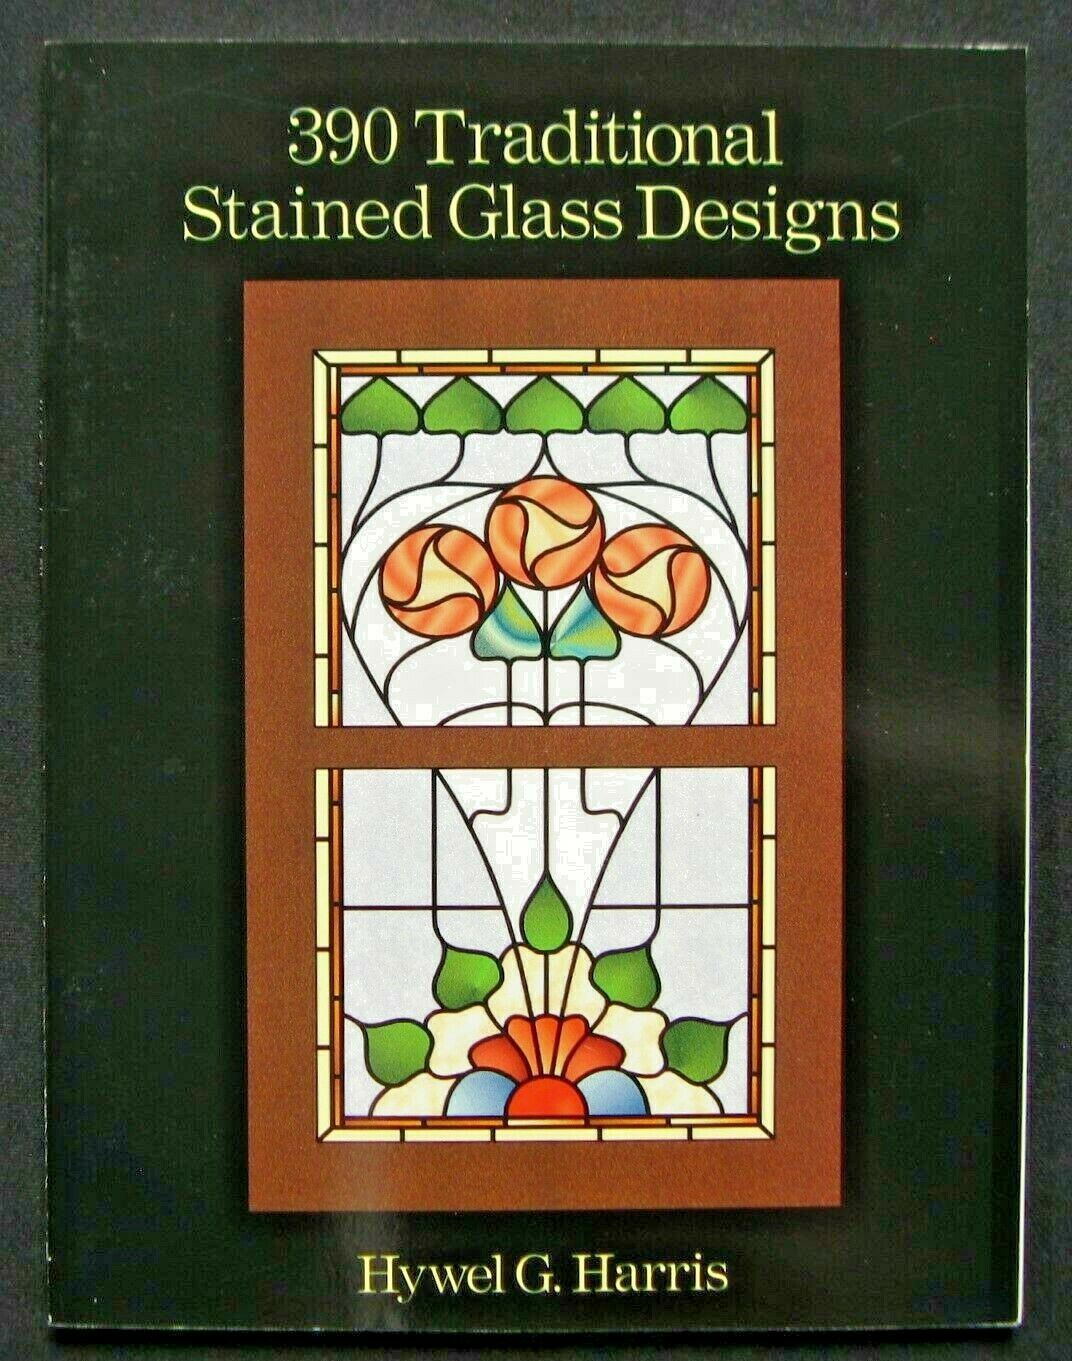 Stained Glass Pattern Book - 390 Traditional Stained Glass Designs